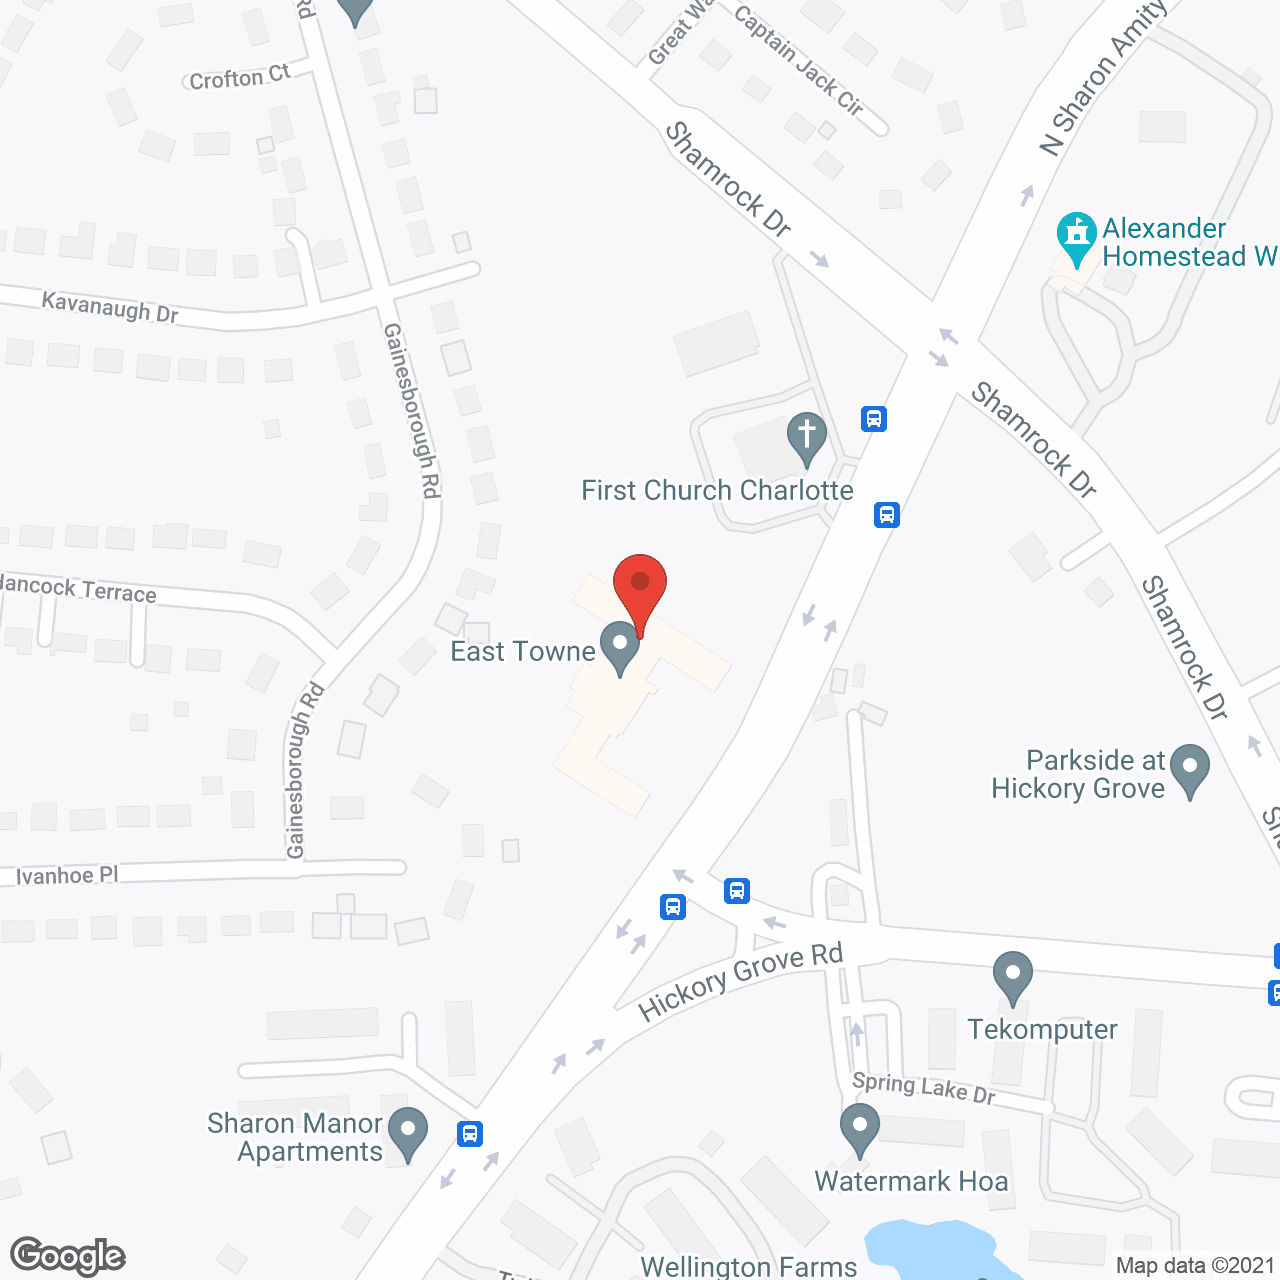 East Towne in google map